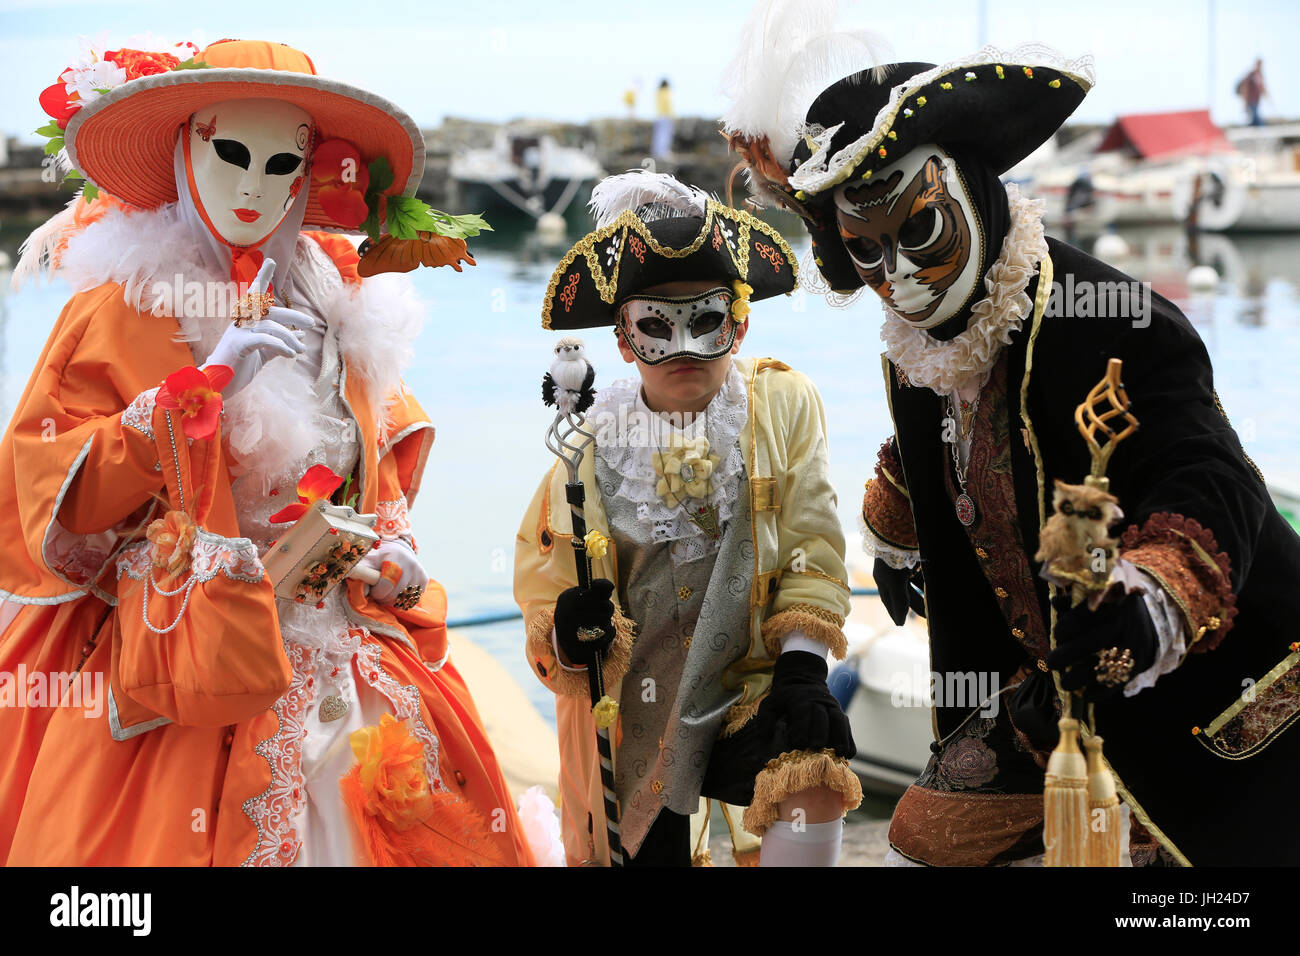 Yvoire, labelled Les Plus Beaux Villages de France (The Most Beautiful Villages of France). The Venitian carnival.  Family wearing carnival costume. Stock Photo